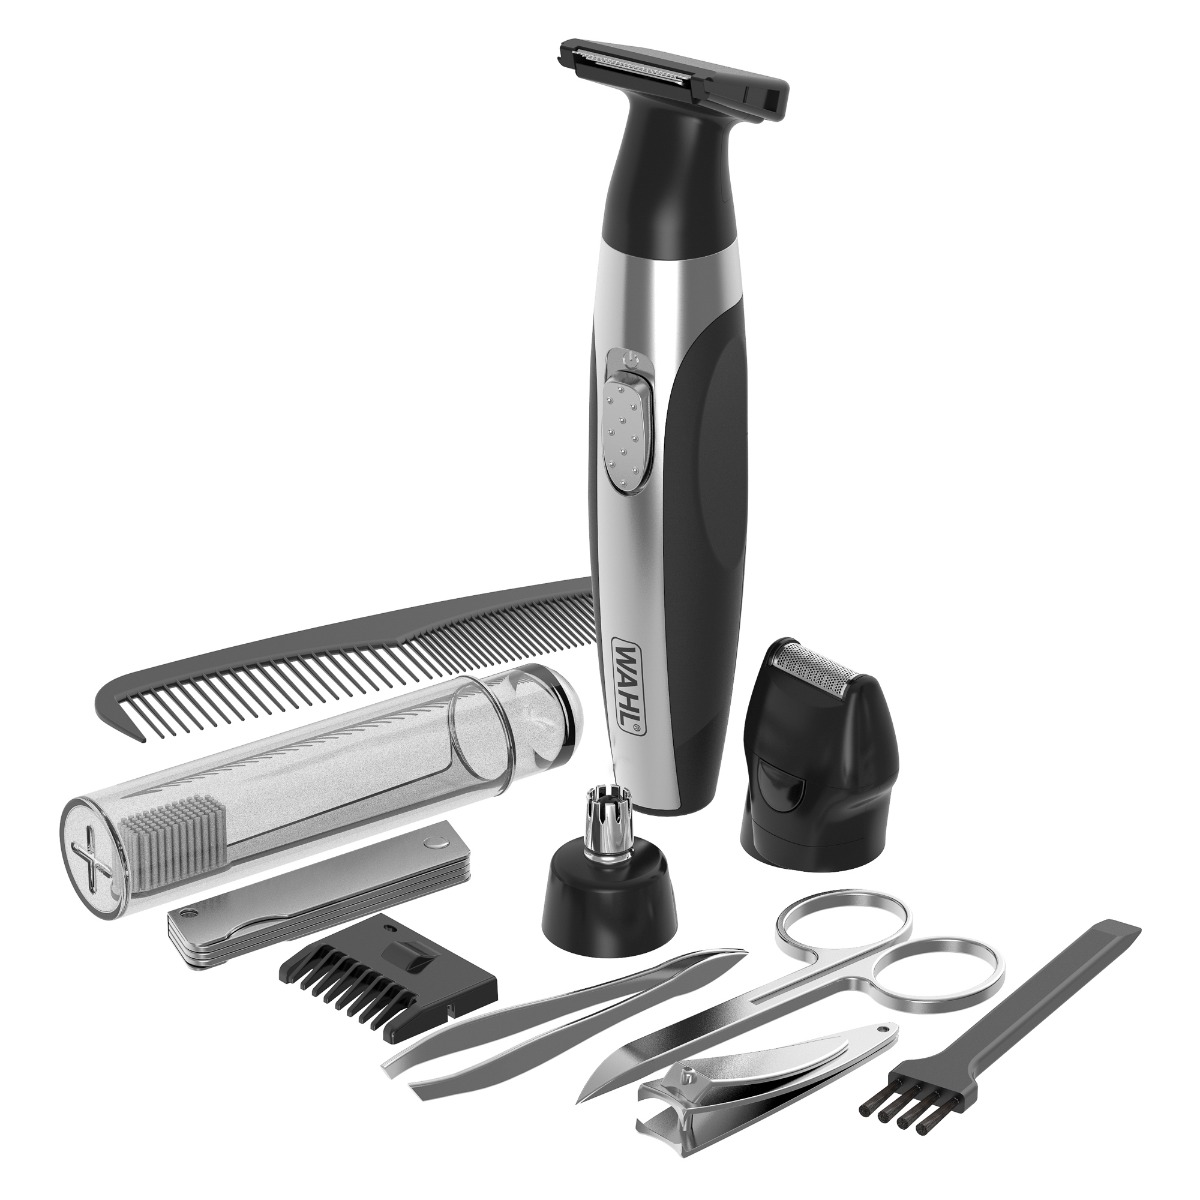 WAHL 05604-616 Travel kit deluxe WAHL